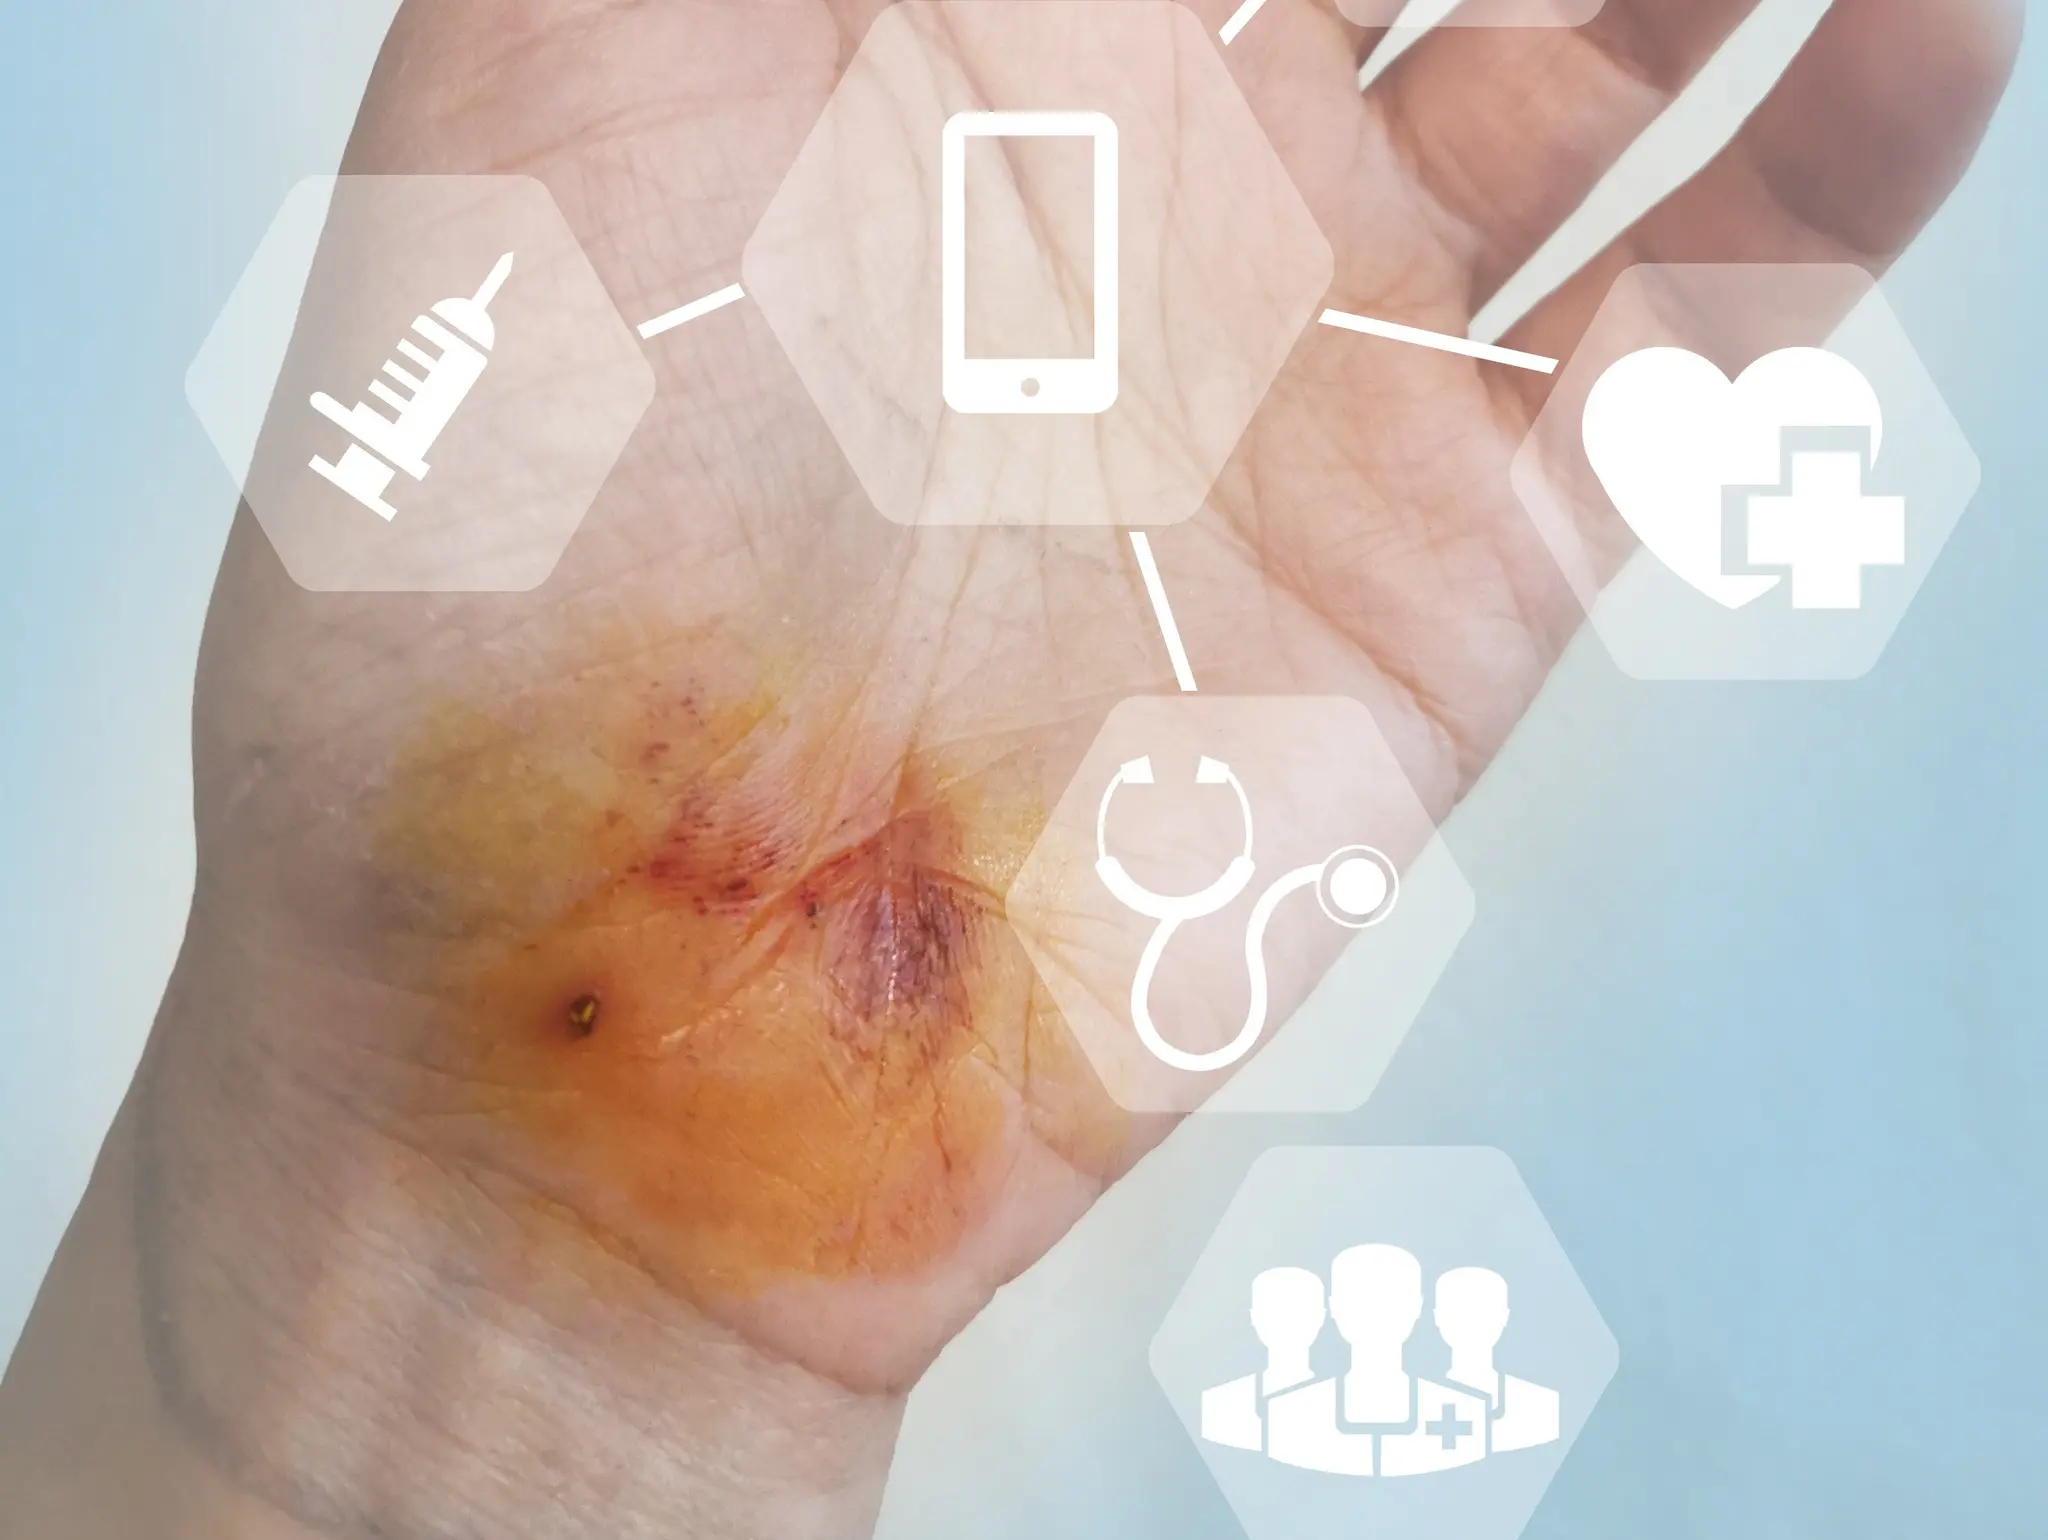 How can AI contribute to improving wound care in the UK